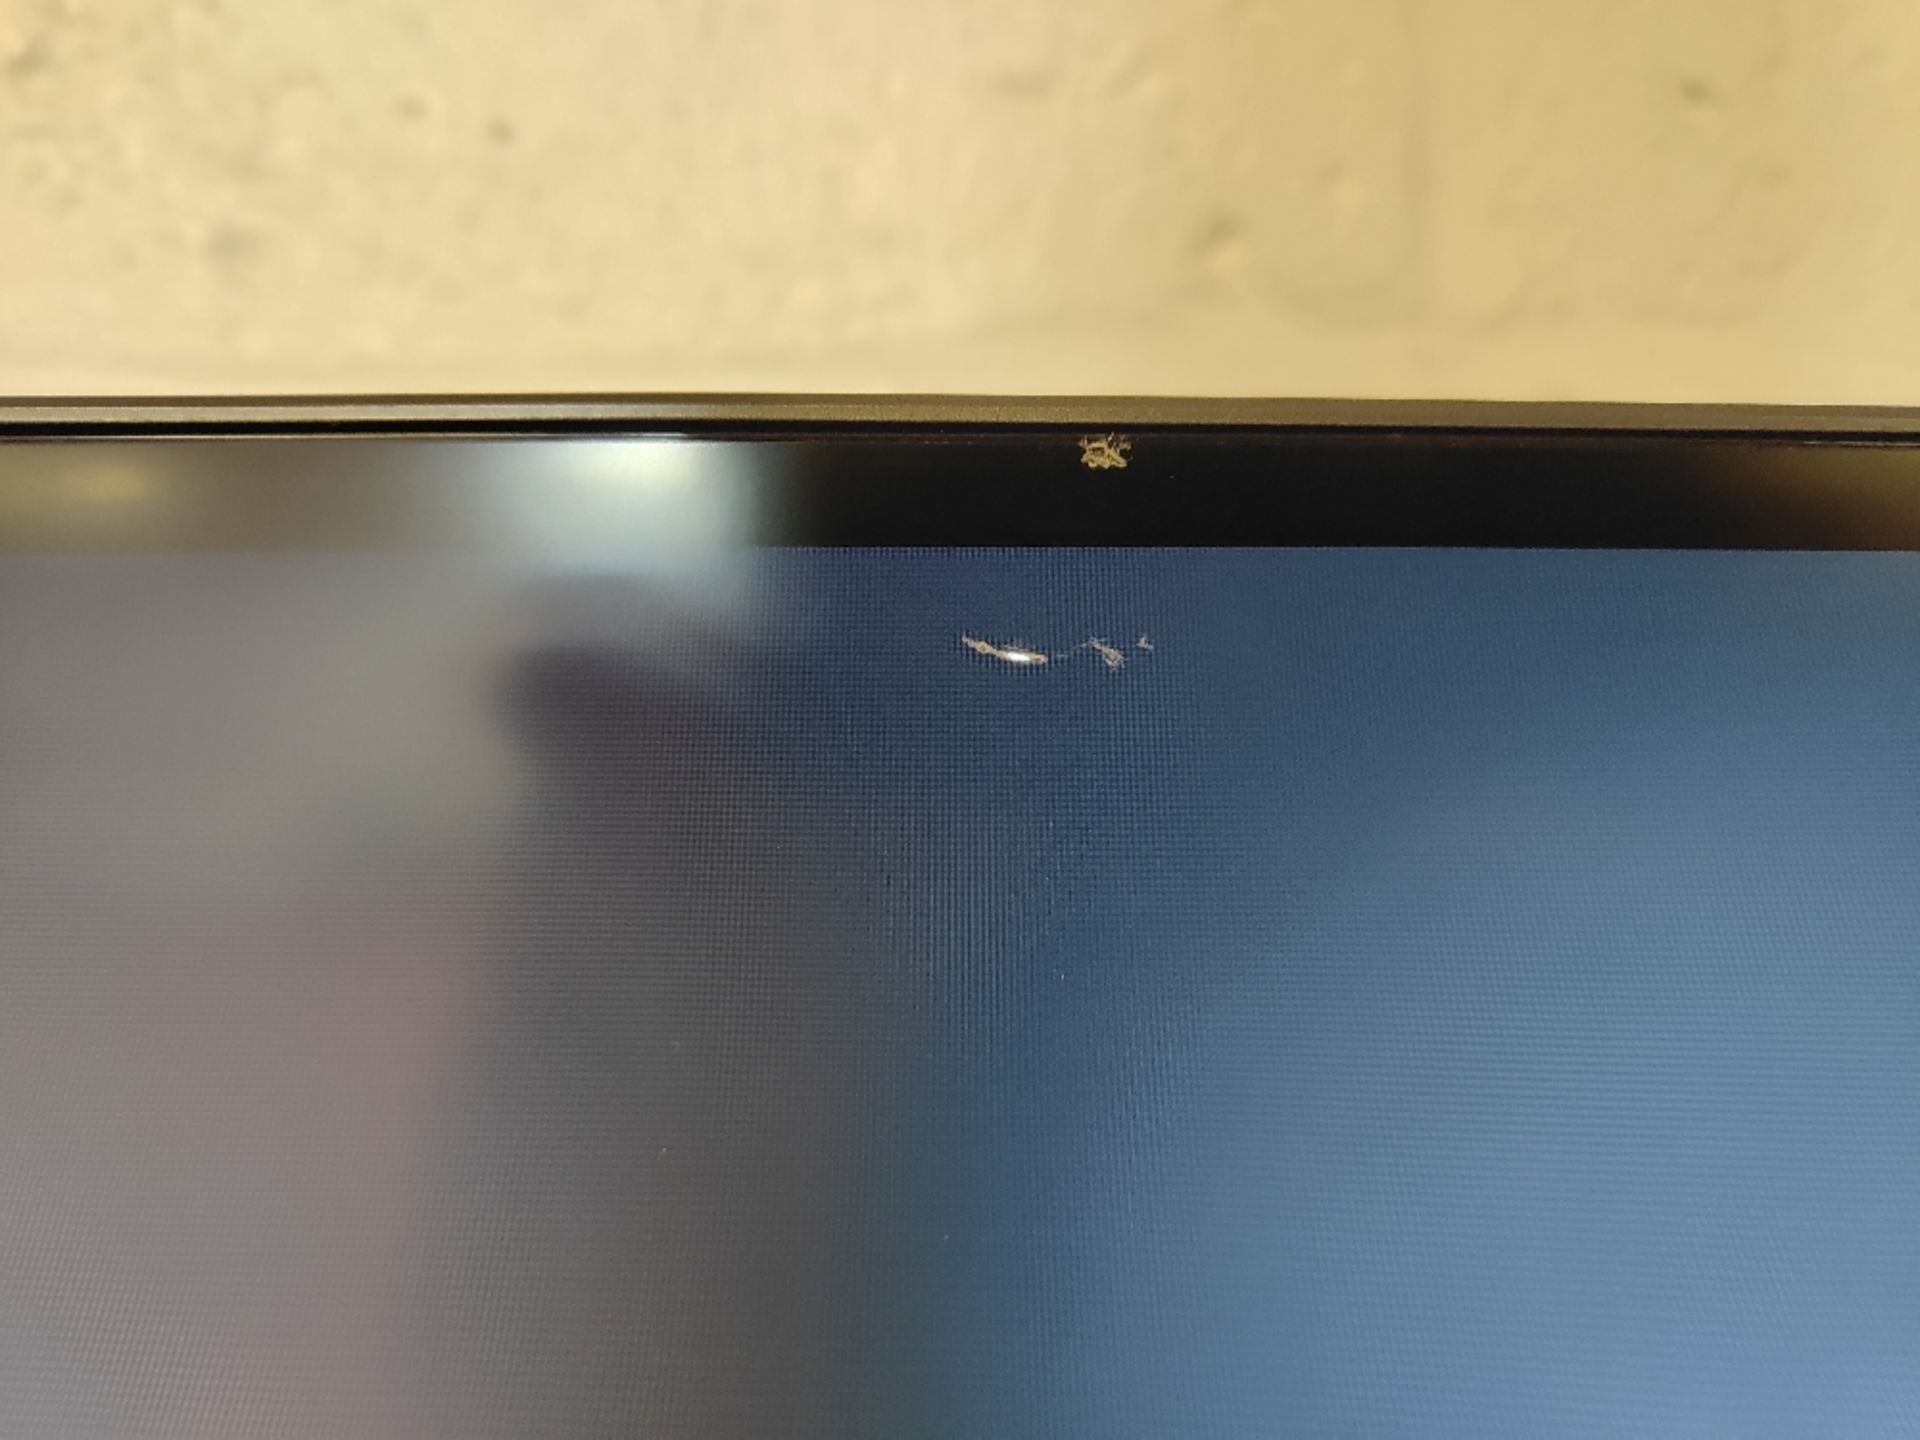 DELL 34" Curved Monitor - Cosmetic Damage - Image 6 of 6